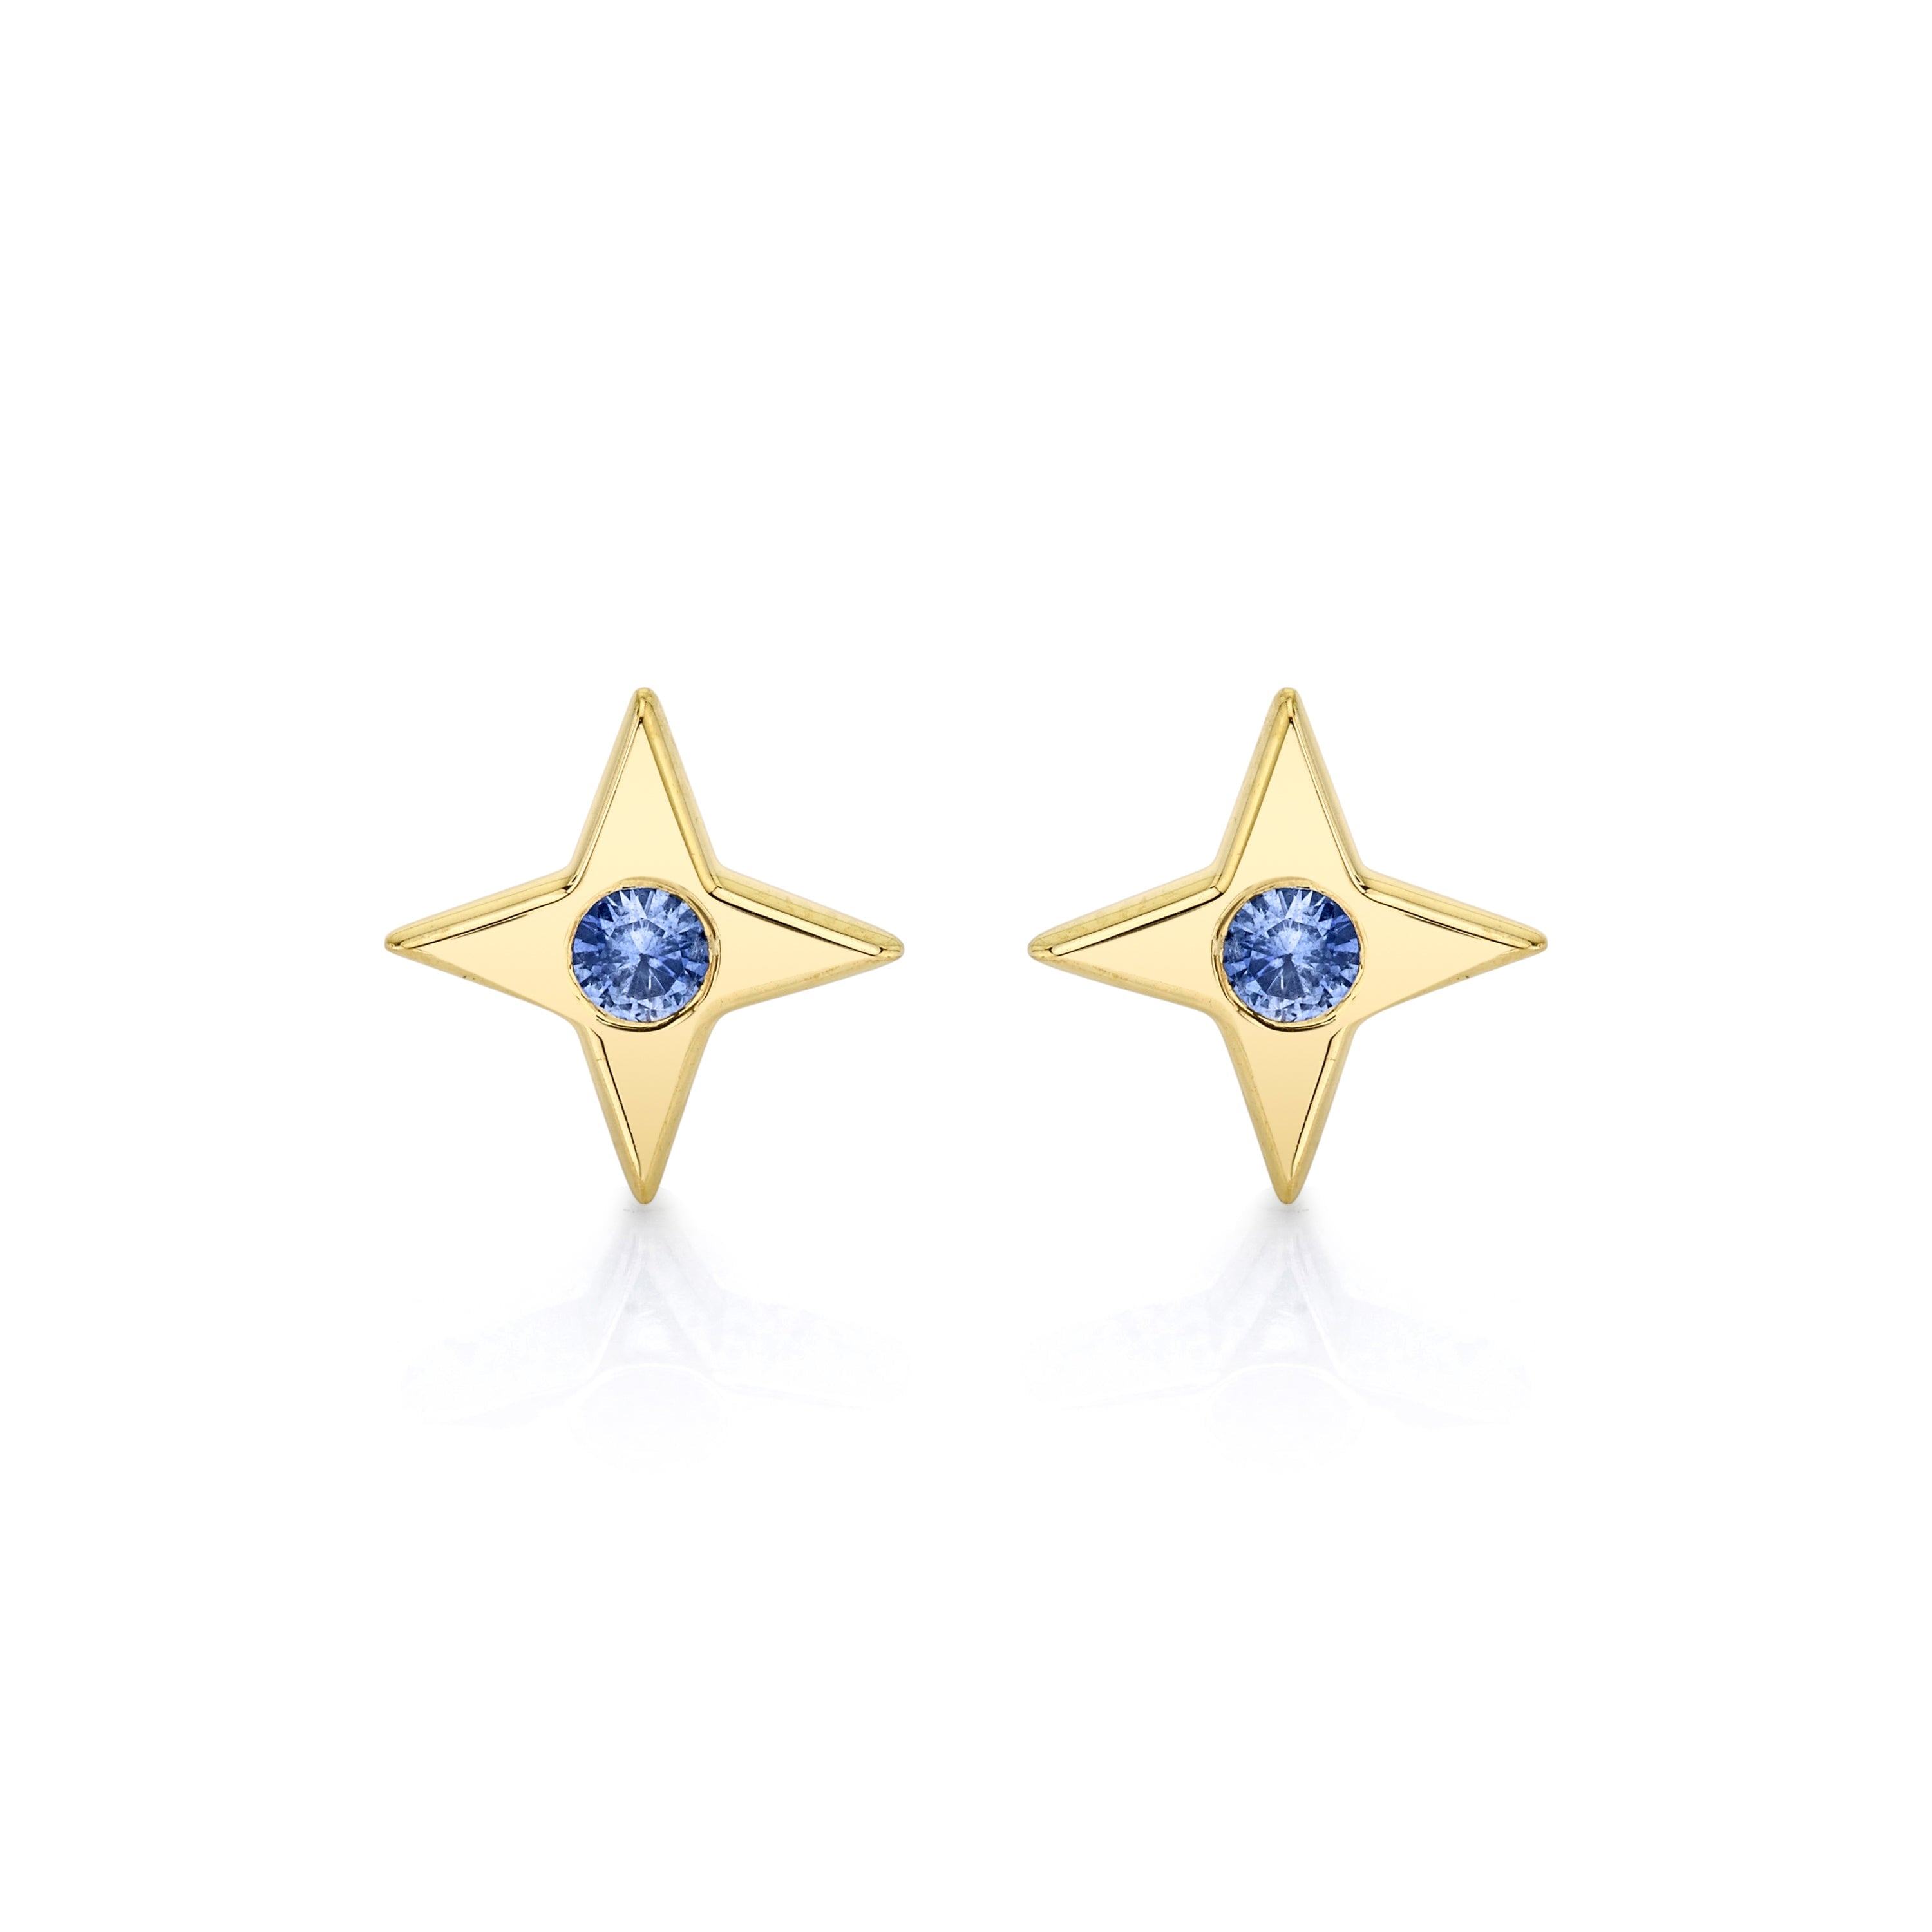 North Star Studs Earrings Carter Eve Jewelry 